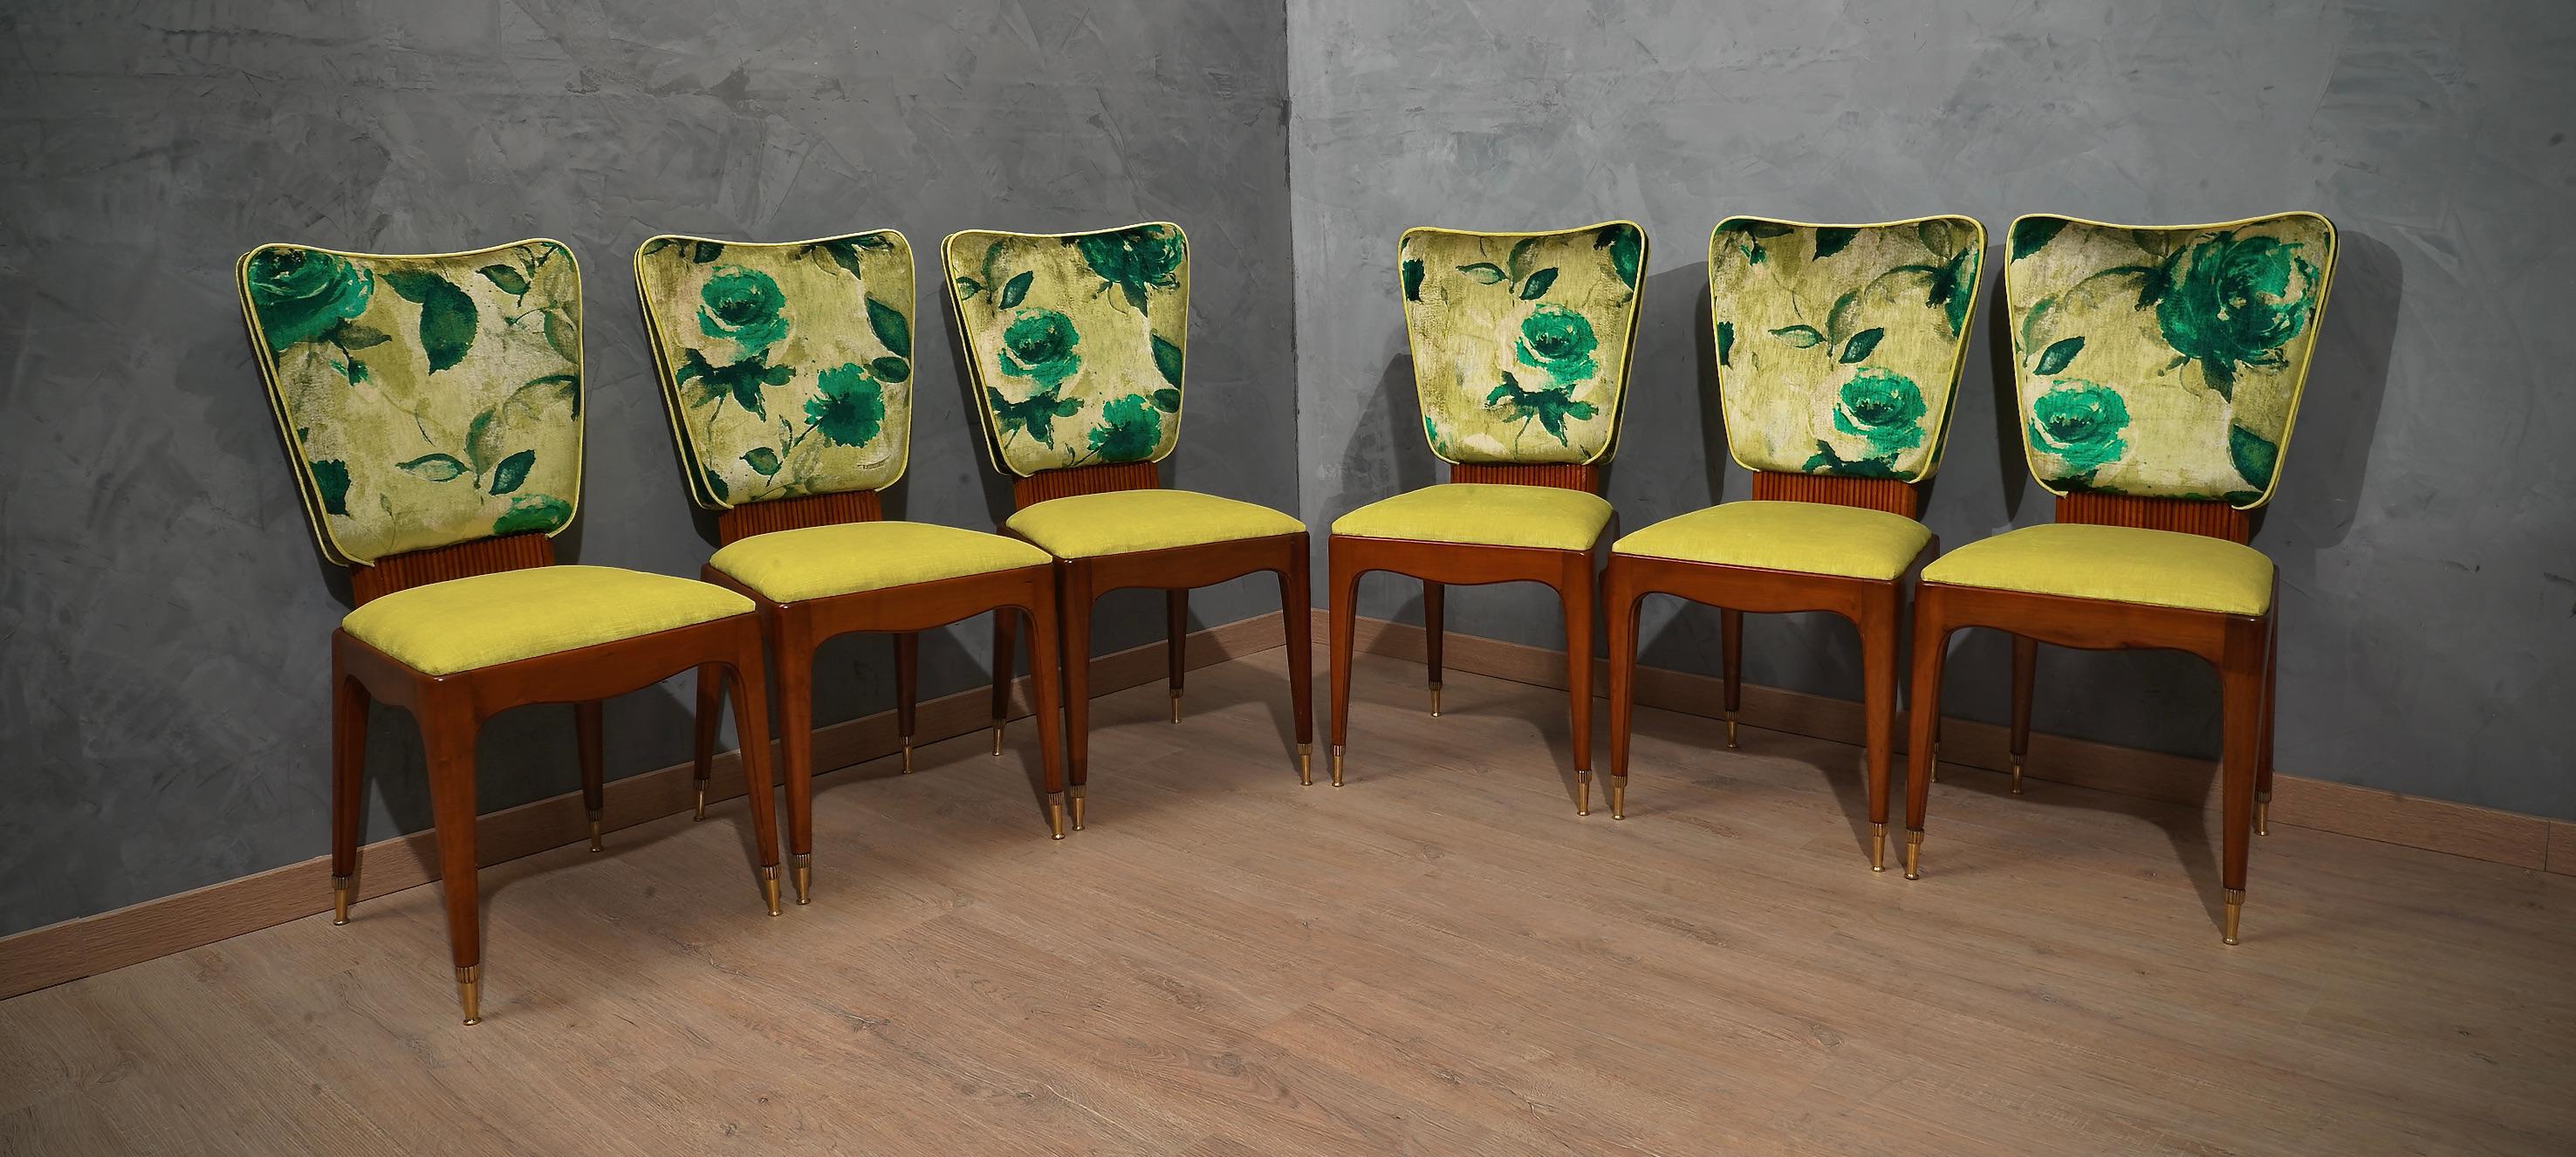 Osvaldo Borsani Attributed Cherry Wood and Floral Fabric Six Chairs, 1950 For Sale 7